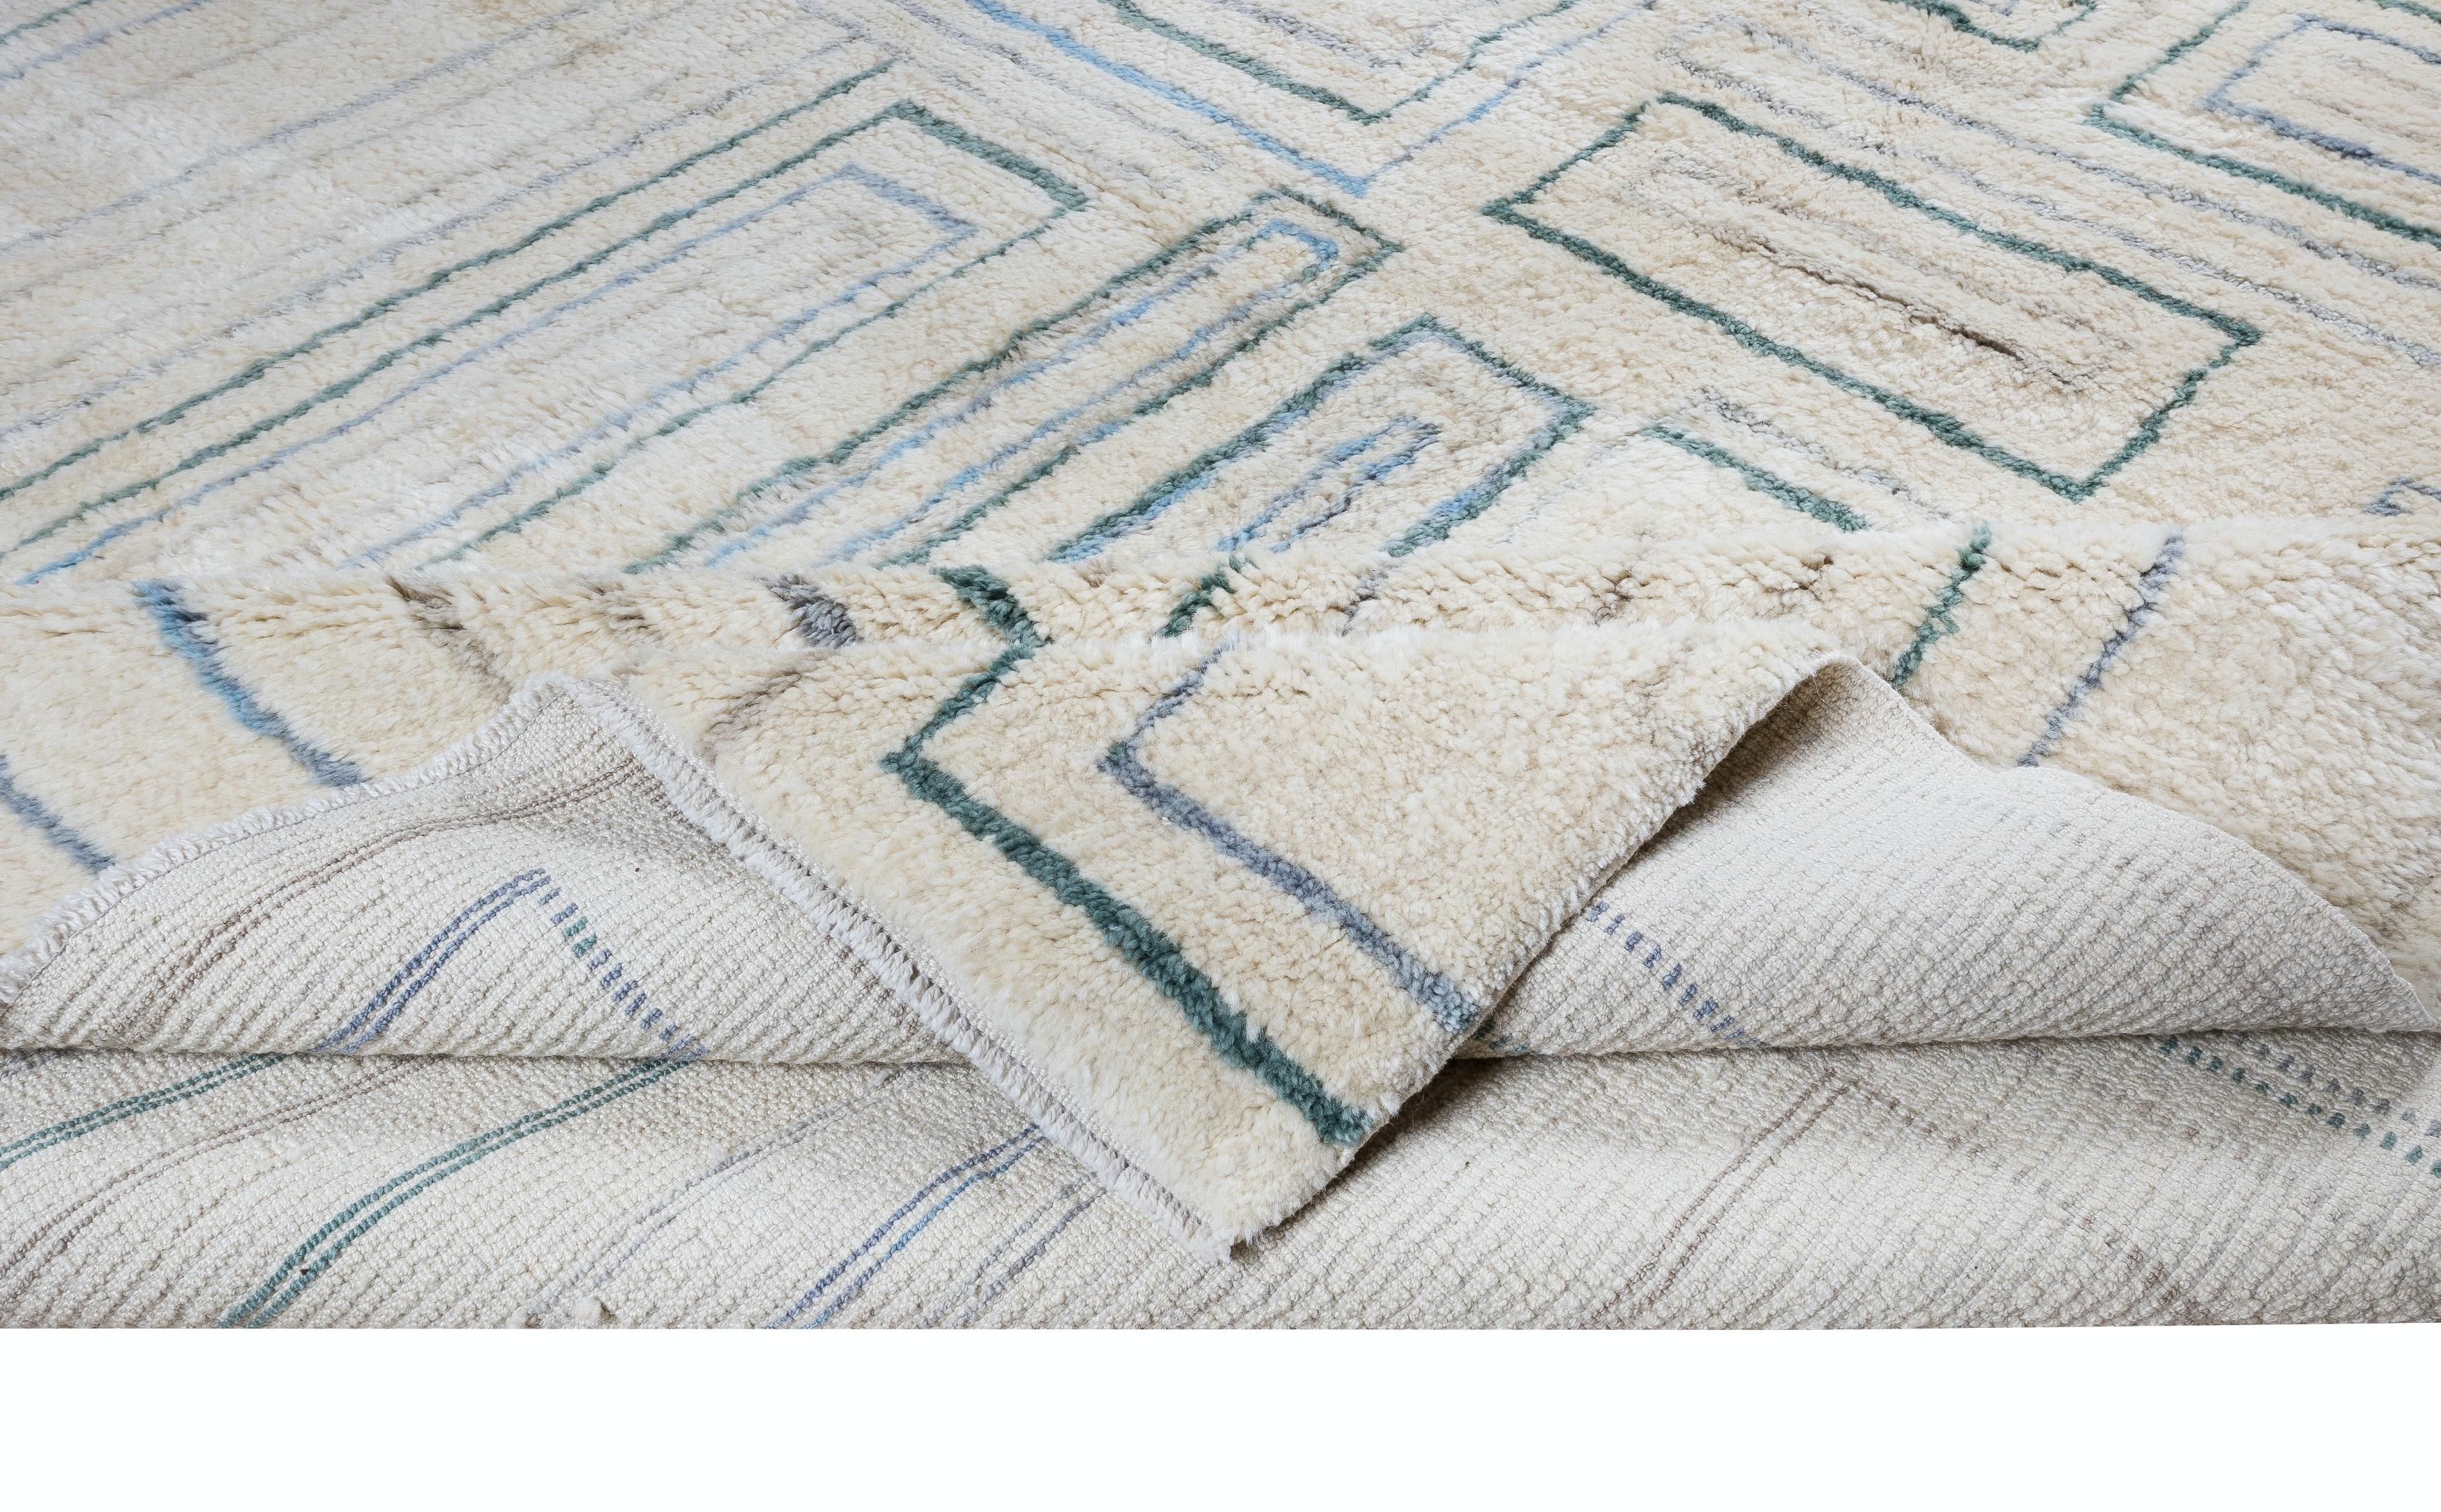 100% Hand-Spun Wool of finest quality.

These beautiful hand knotted rugs are produced from scratch in our atelier located in Central Anatolia, famous for being one of the world's oldest handmade rug making centers.

All our weavers are adult female